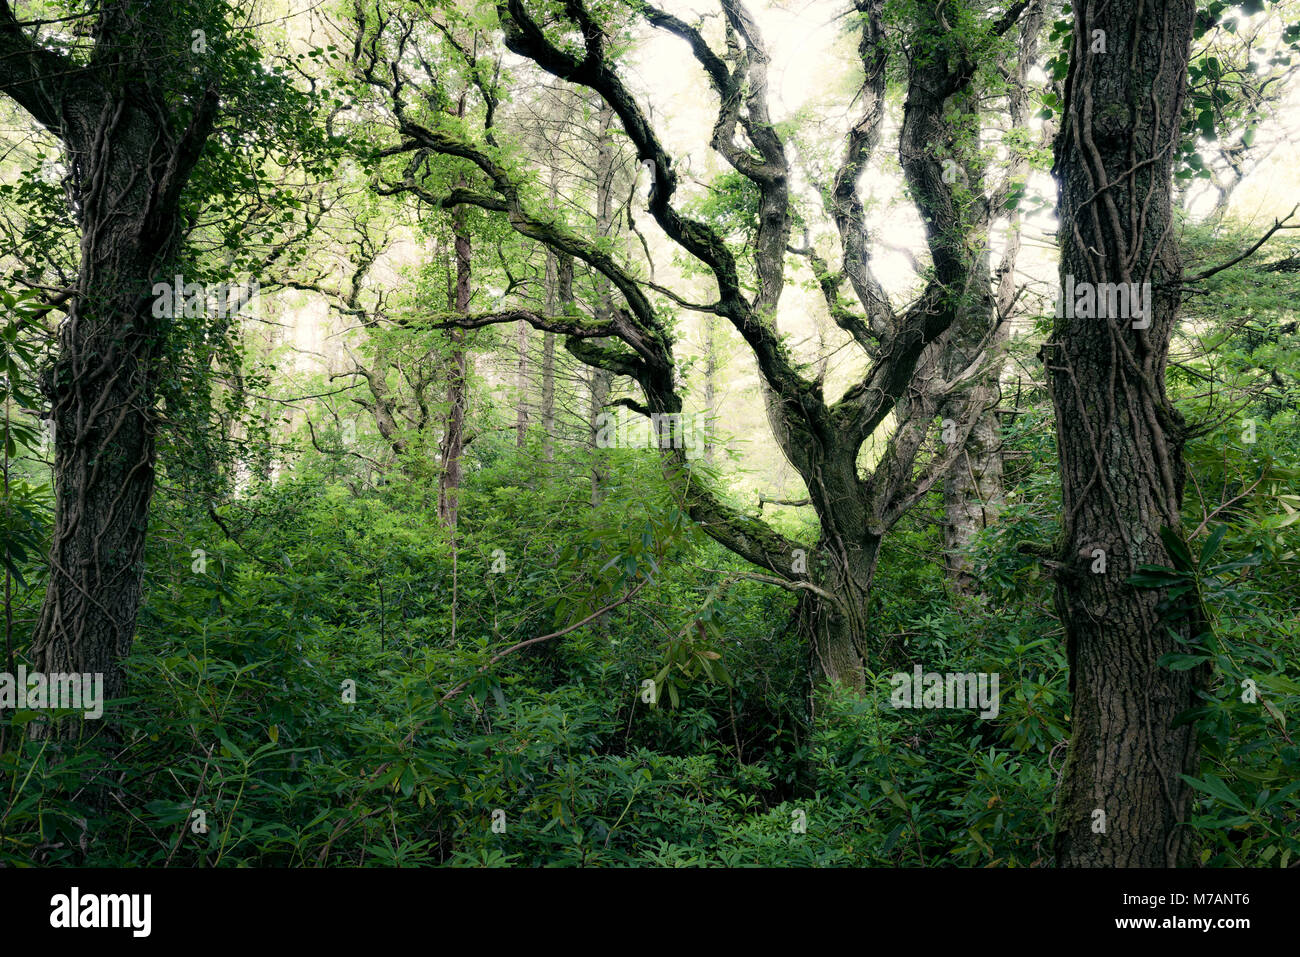 Old Oaks and Rhododendron in Ards Forest Park, Donegal, Ireland Stock Photo